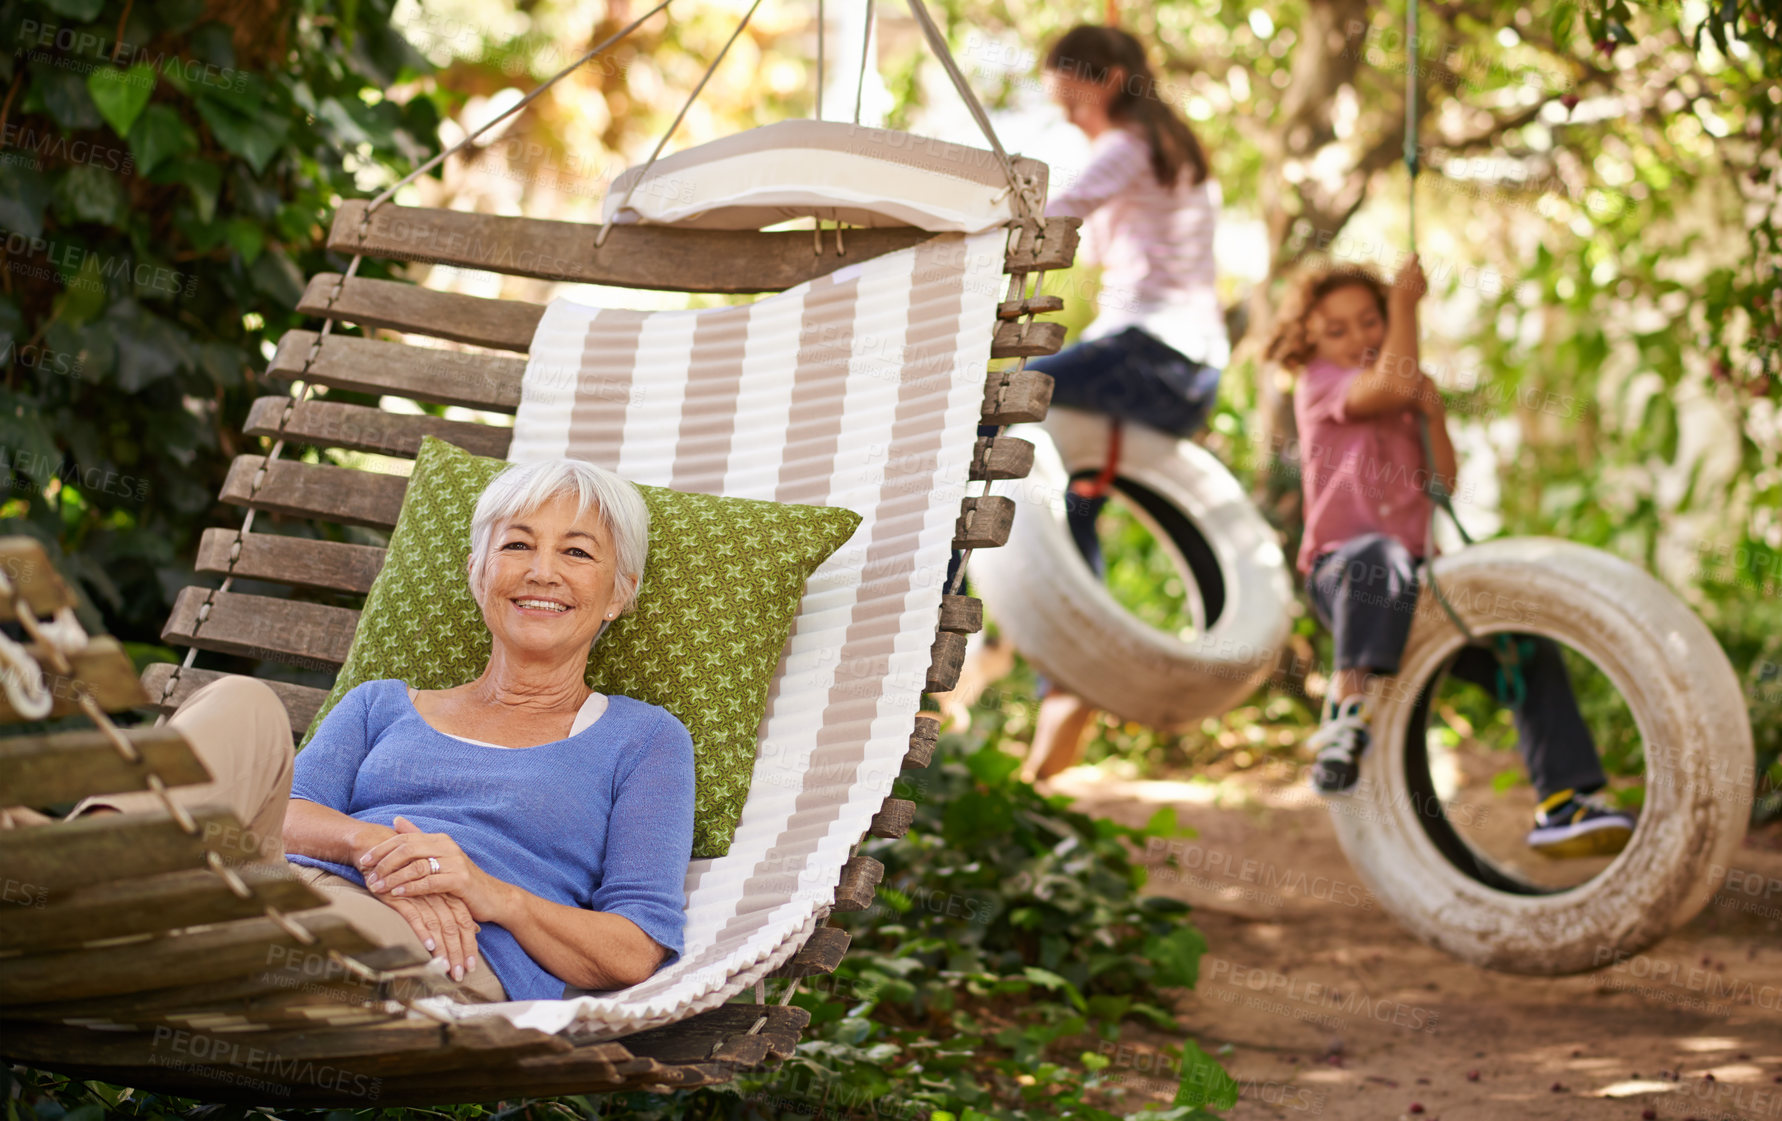 Buy stock photo Relax, happy and senior woman on a hammock while grandchildren play in the garden of the family home. Happiness, smile and portrait of elderly female person in retirement resting outdoor in backyard.